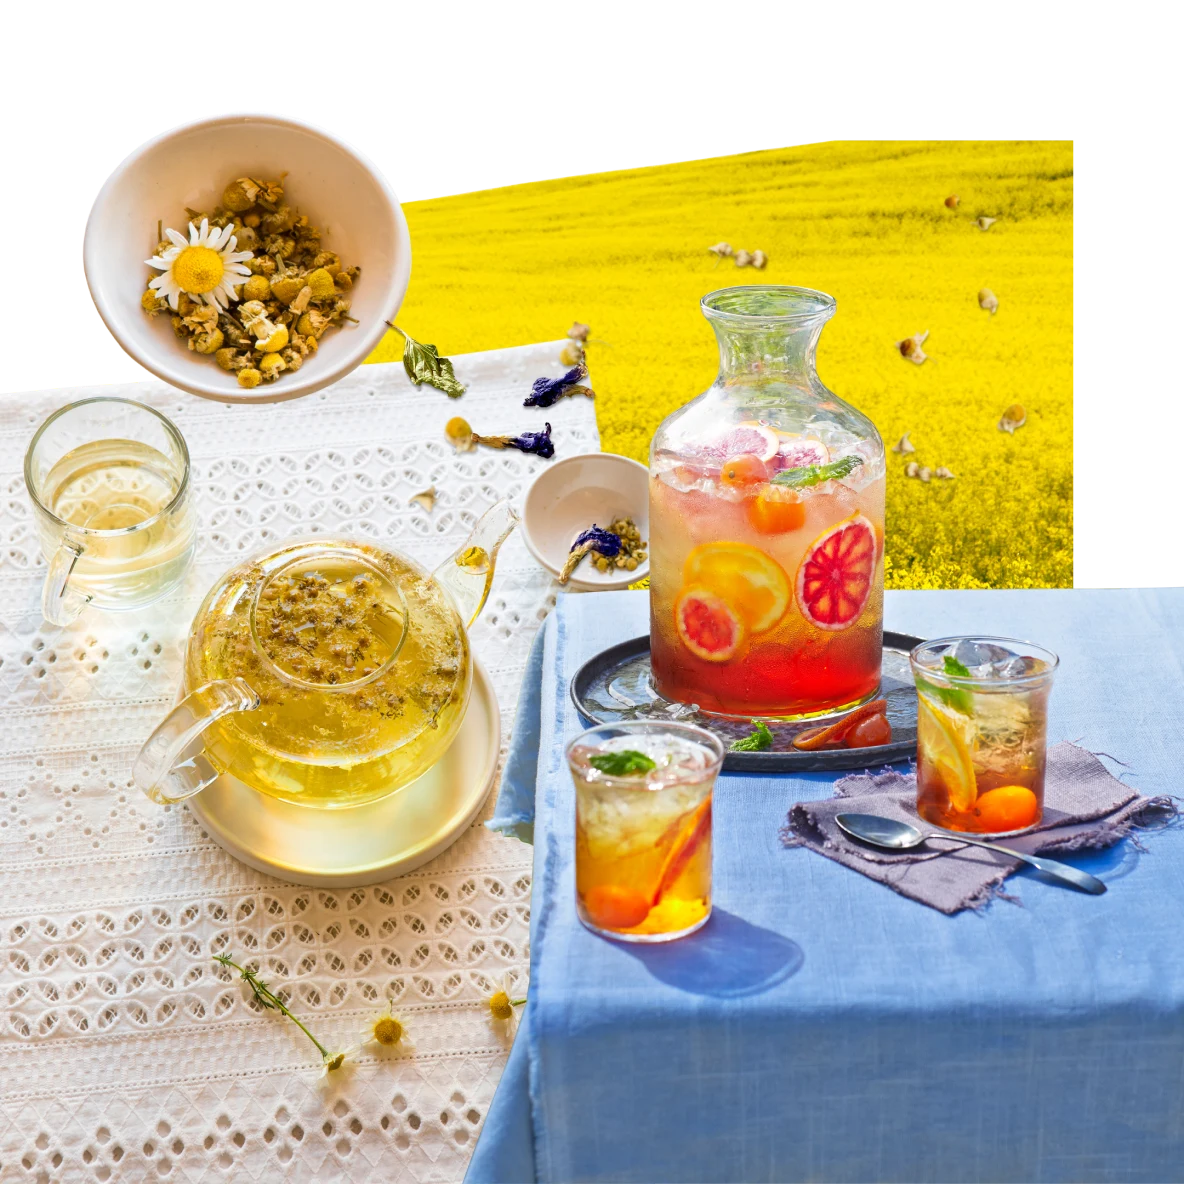 Collage of tea-themed items. A carafe of citrus-flavoured iced tea is beside two glasses filled with iced tea, on a table covered with a blue tablecloth. A glass teapot filled with herbal tea is next to a glass mug of tea and a cup of herbal tea leaves. A field of yellow flowers is in the background.